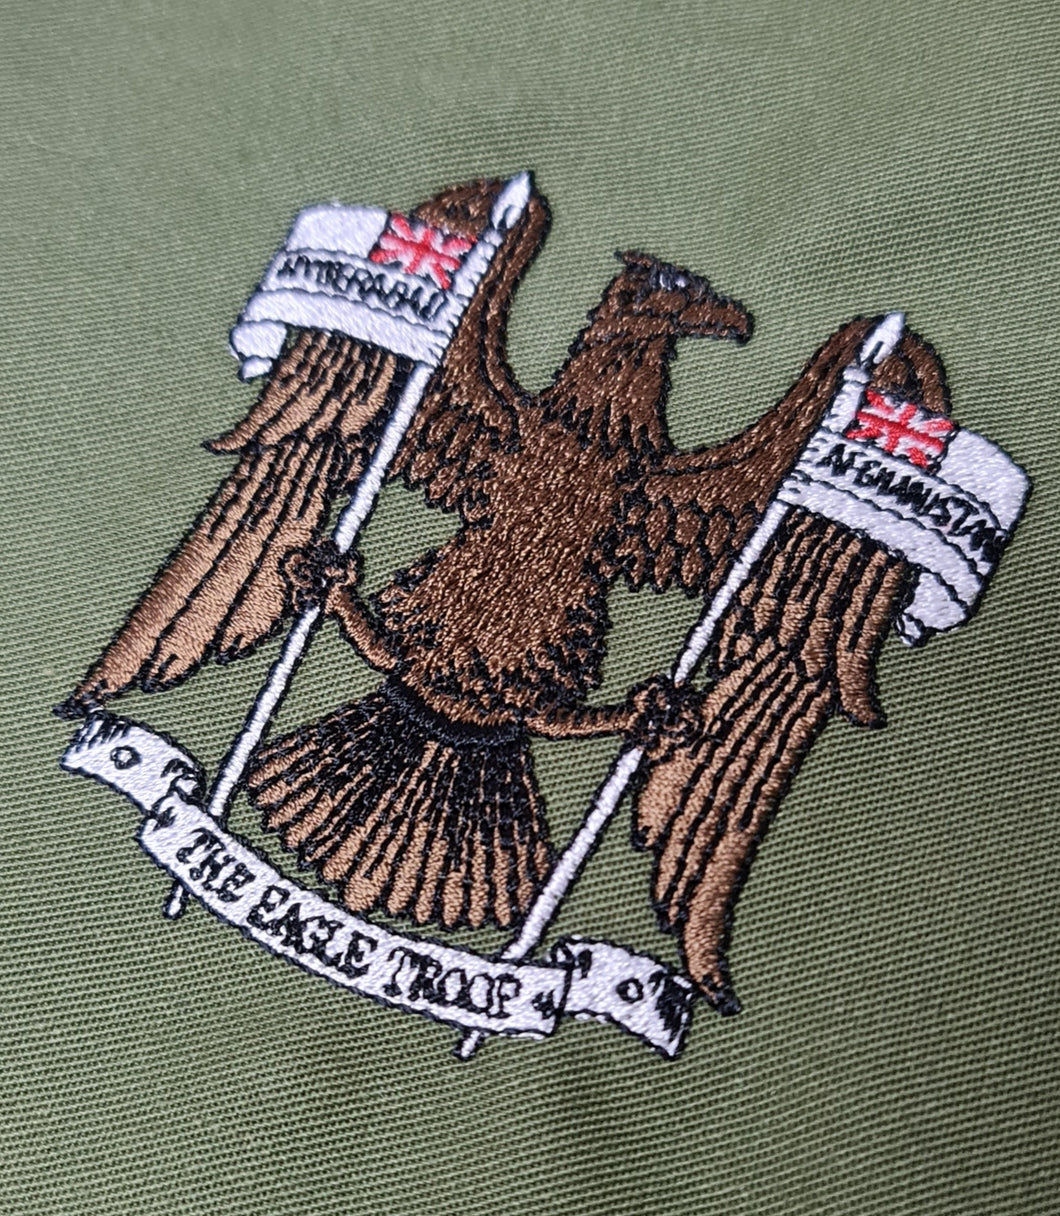 N (Para) Bty 'The Eagle Troop' 7 RHA  - Embroidered Design - Choose your Garment